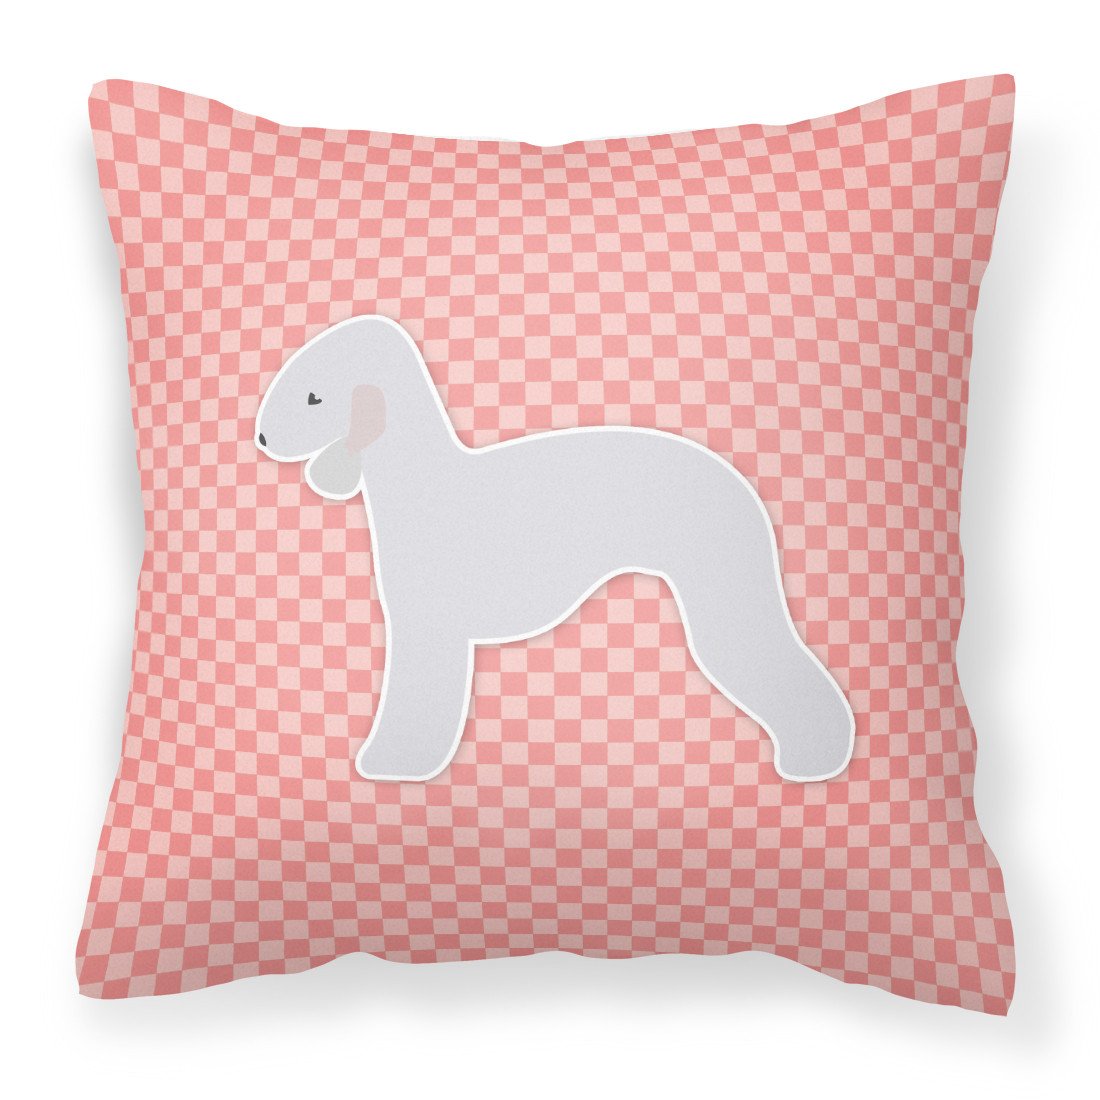 Bedlington Terrier Checkerboard Pink Fabric Decorative Pillow BB3594PW1818 by Caroline's Treasures